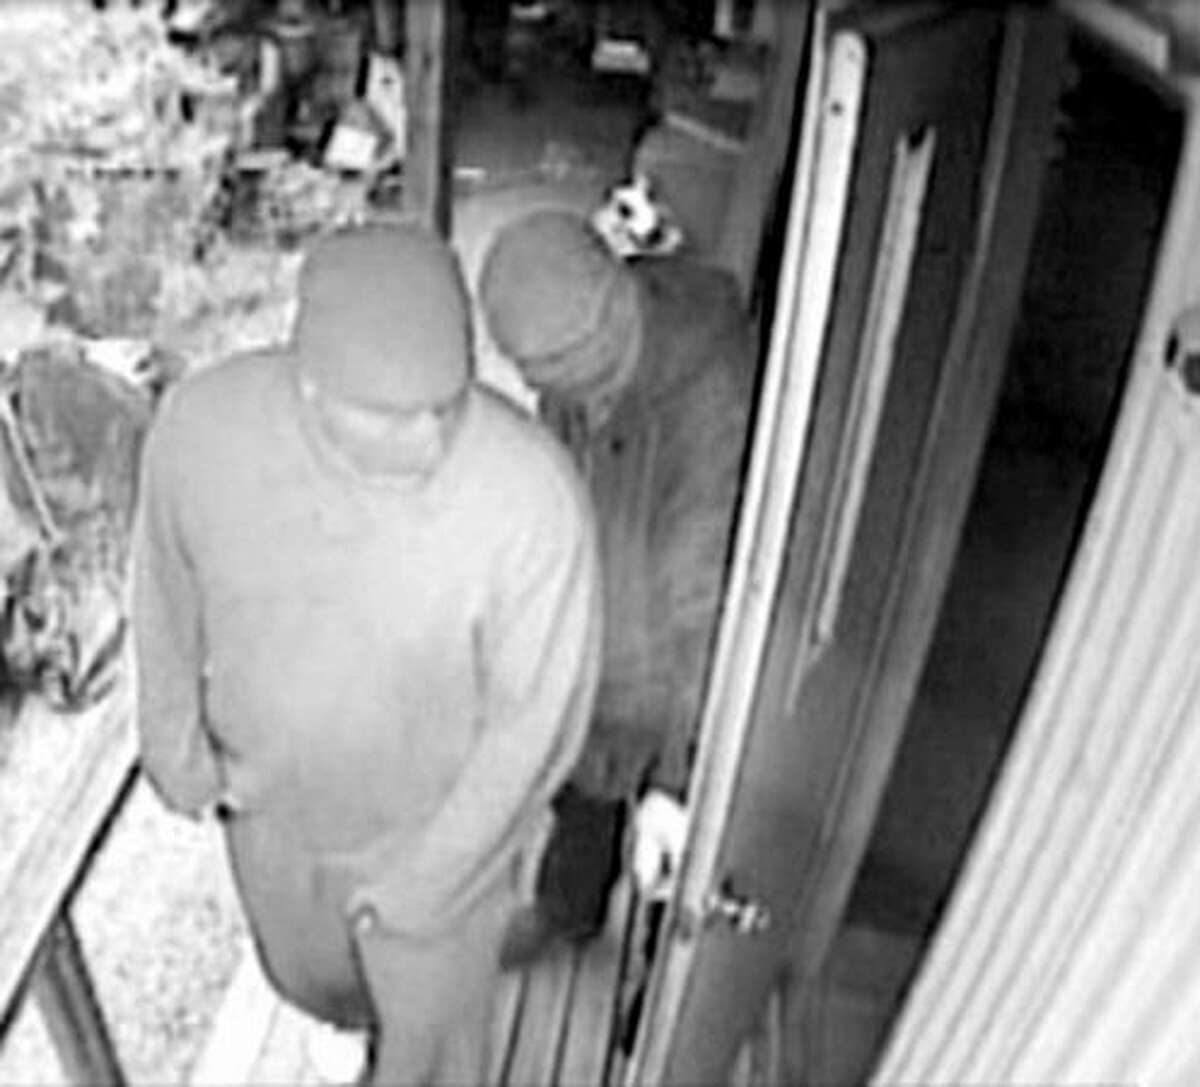 A surveillance image from an August 19 Vashon Island home-invasion robbery in the 9400 block of Southwest Gorsuch Road. Read more about the robbery here. (Photo from King County Sheriff's Office)